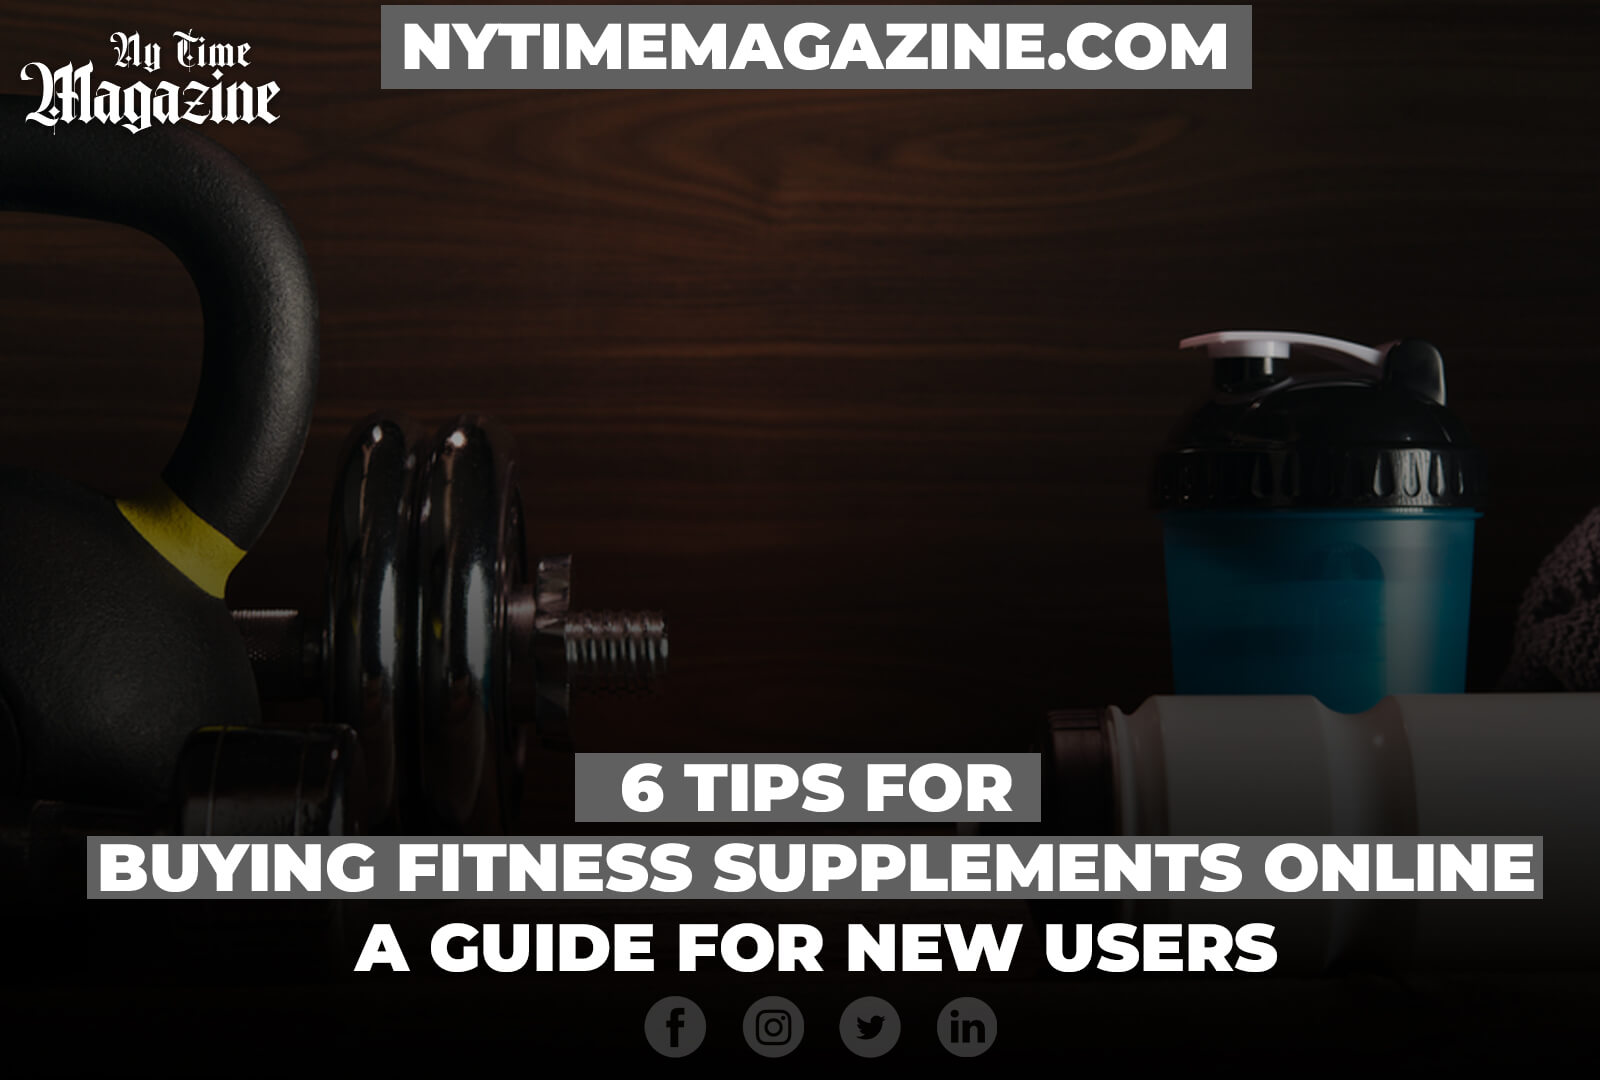 6 Tips for Buying Fitness Supplements Online: A Guide for New Users